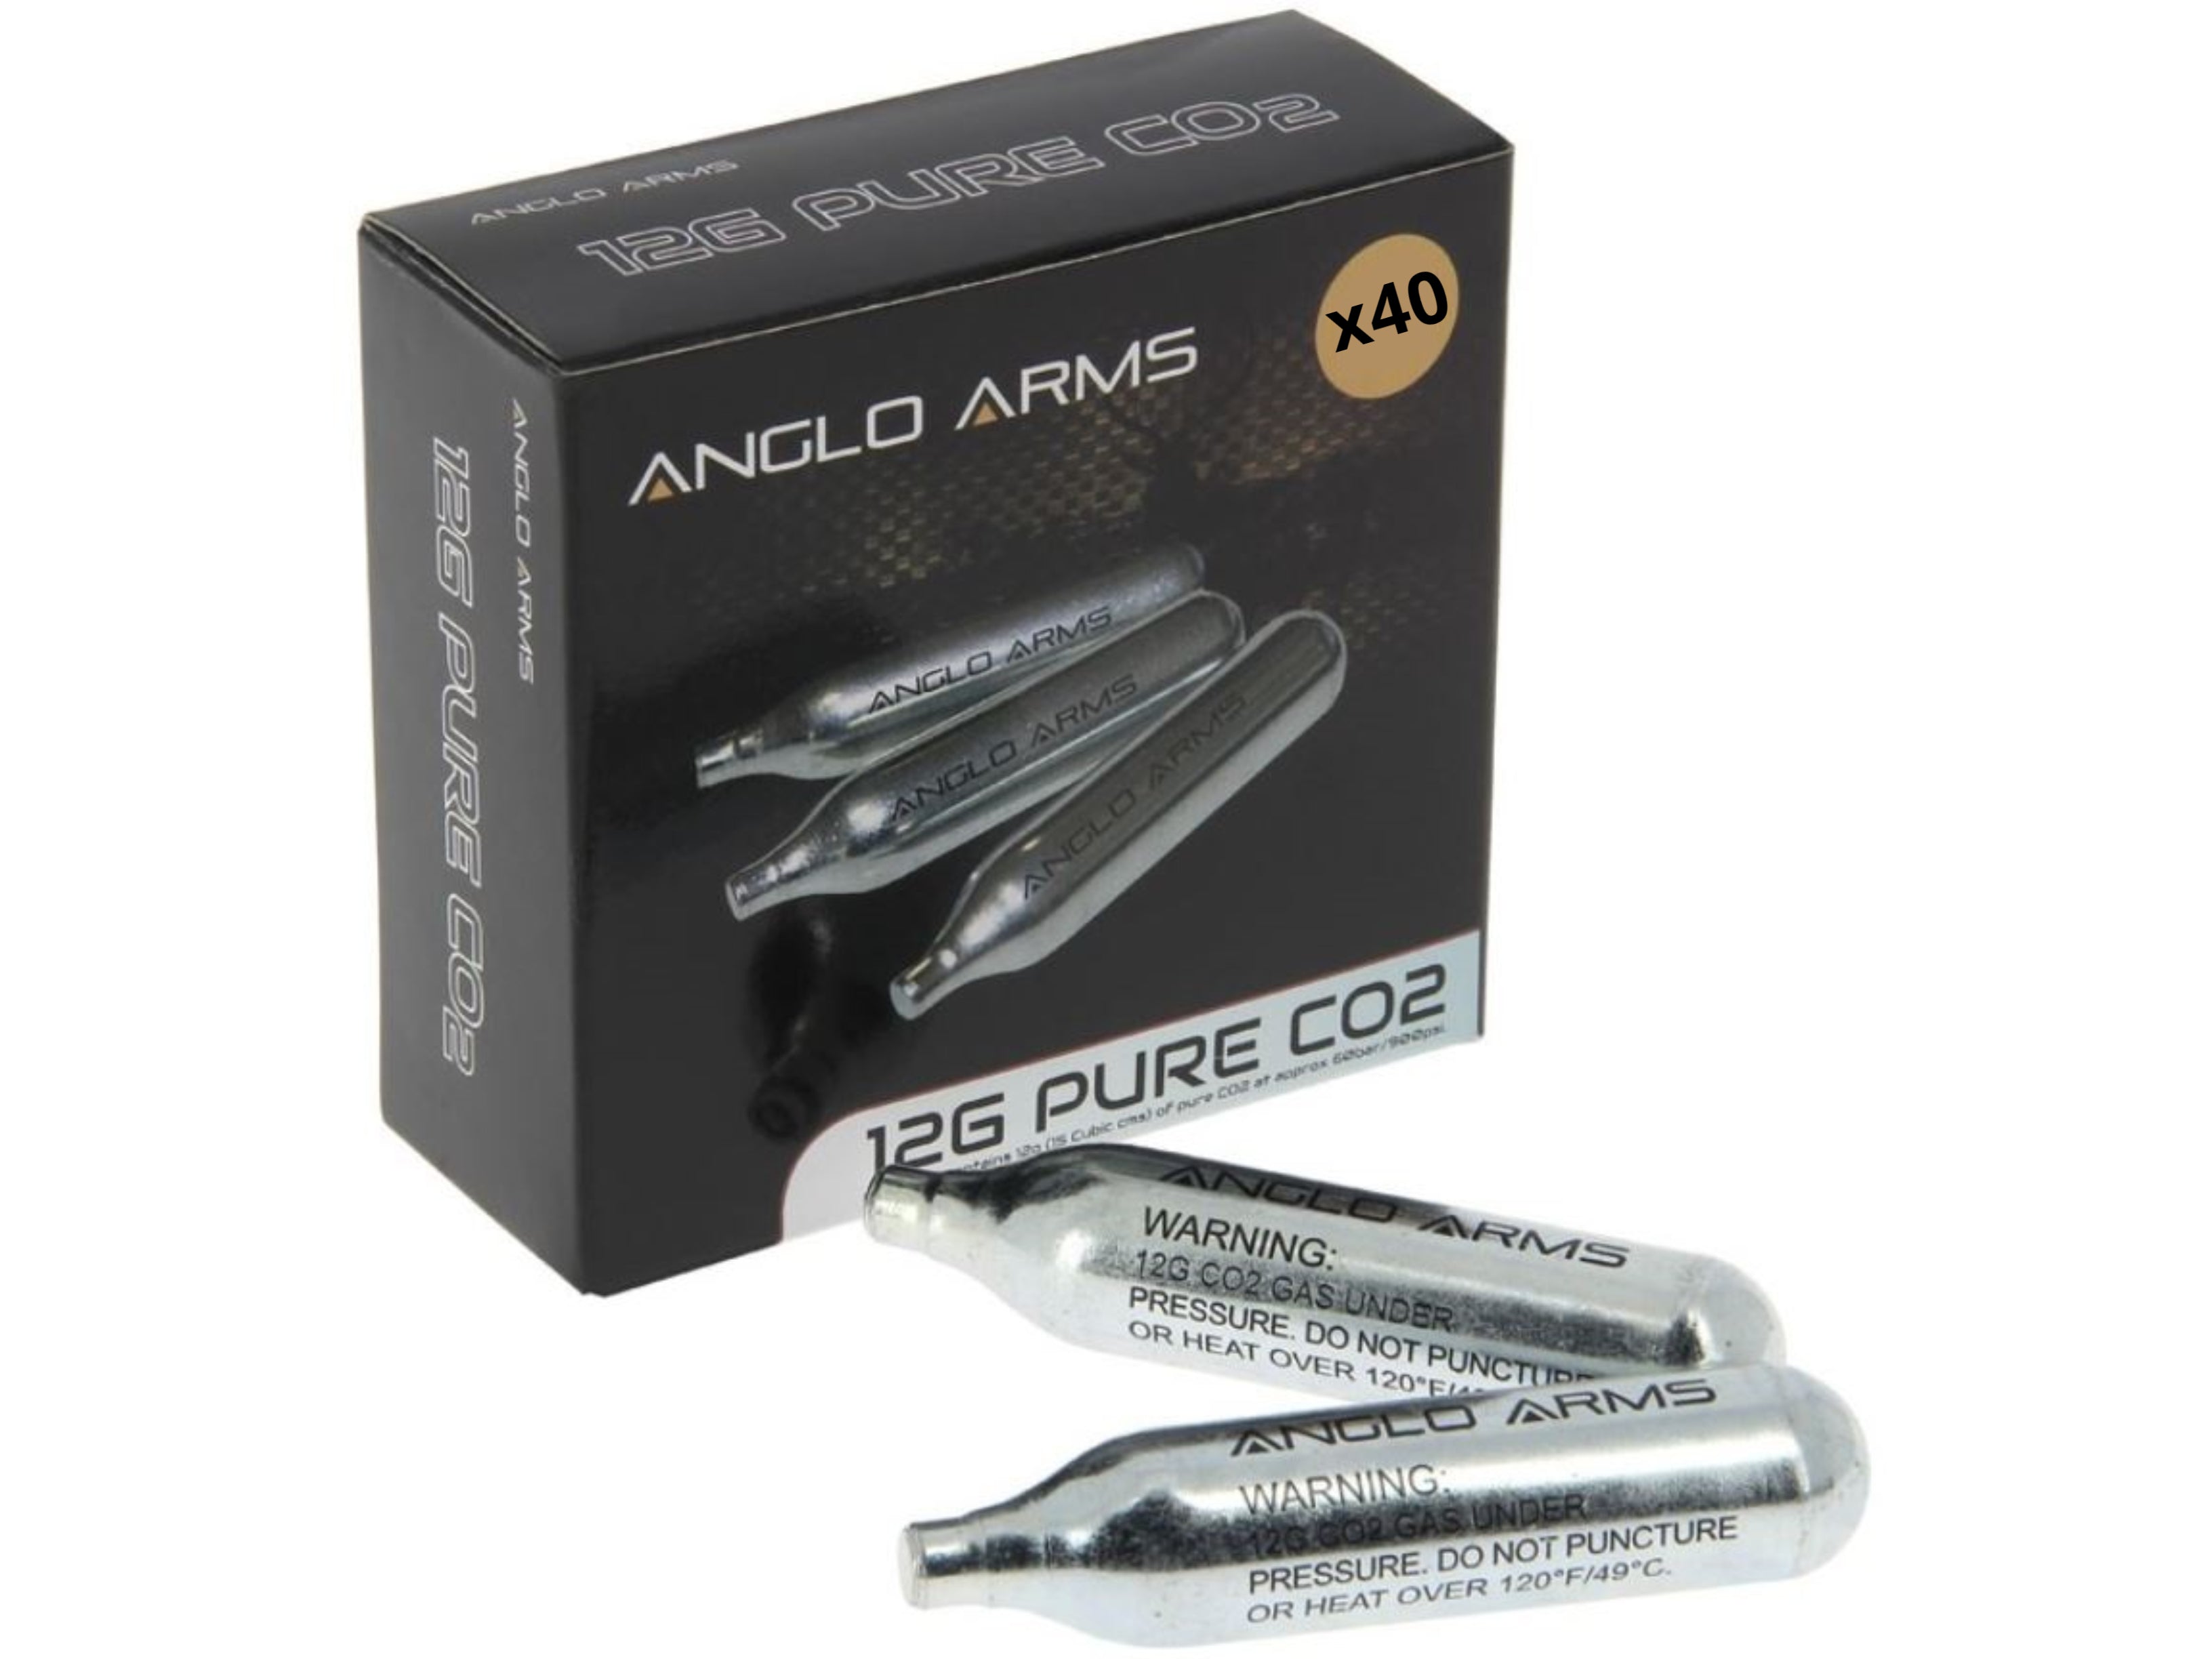 ANGLO ARMS 40 X ANGLO ARMS 12G GRAM CO2 CAPSULE CARTRIDGE SET